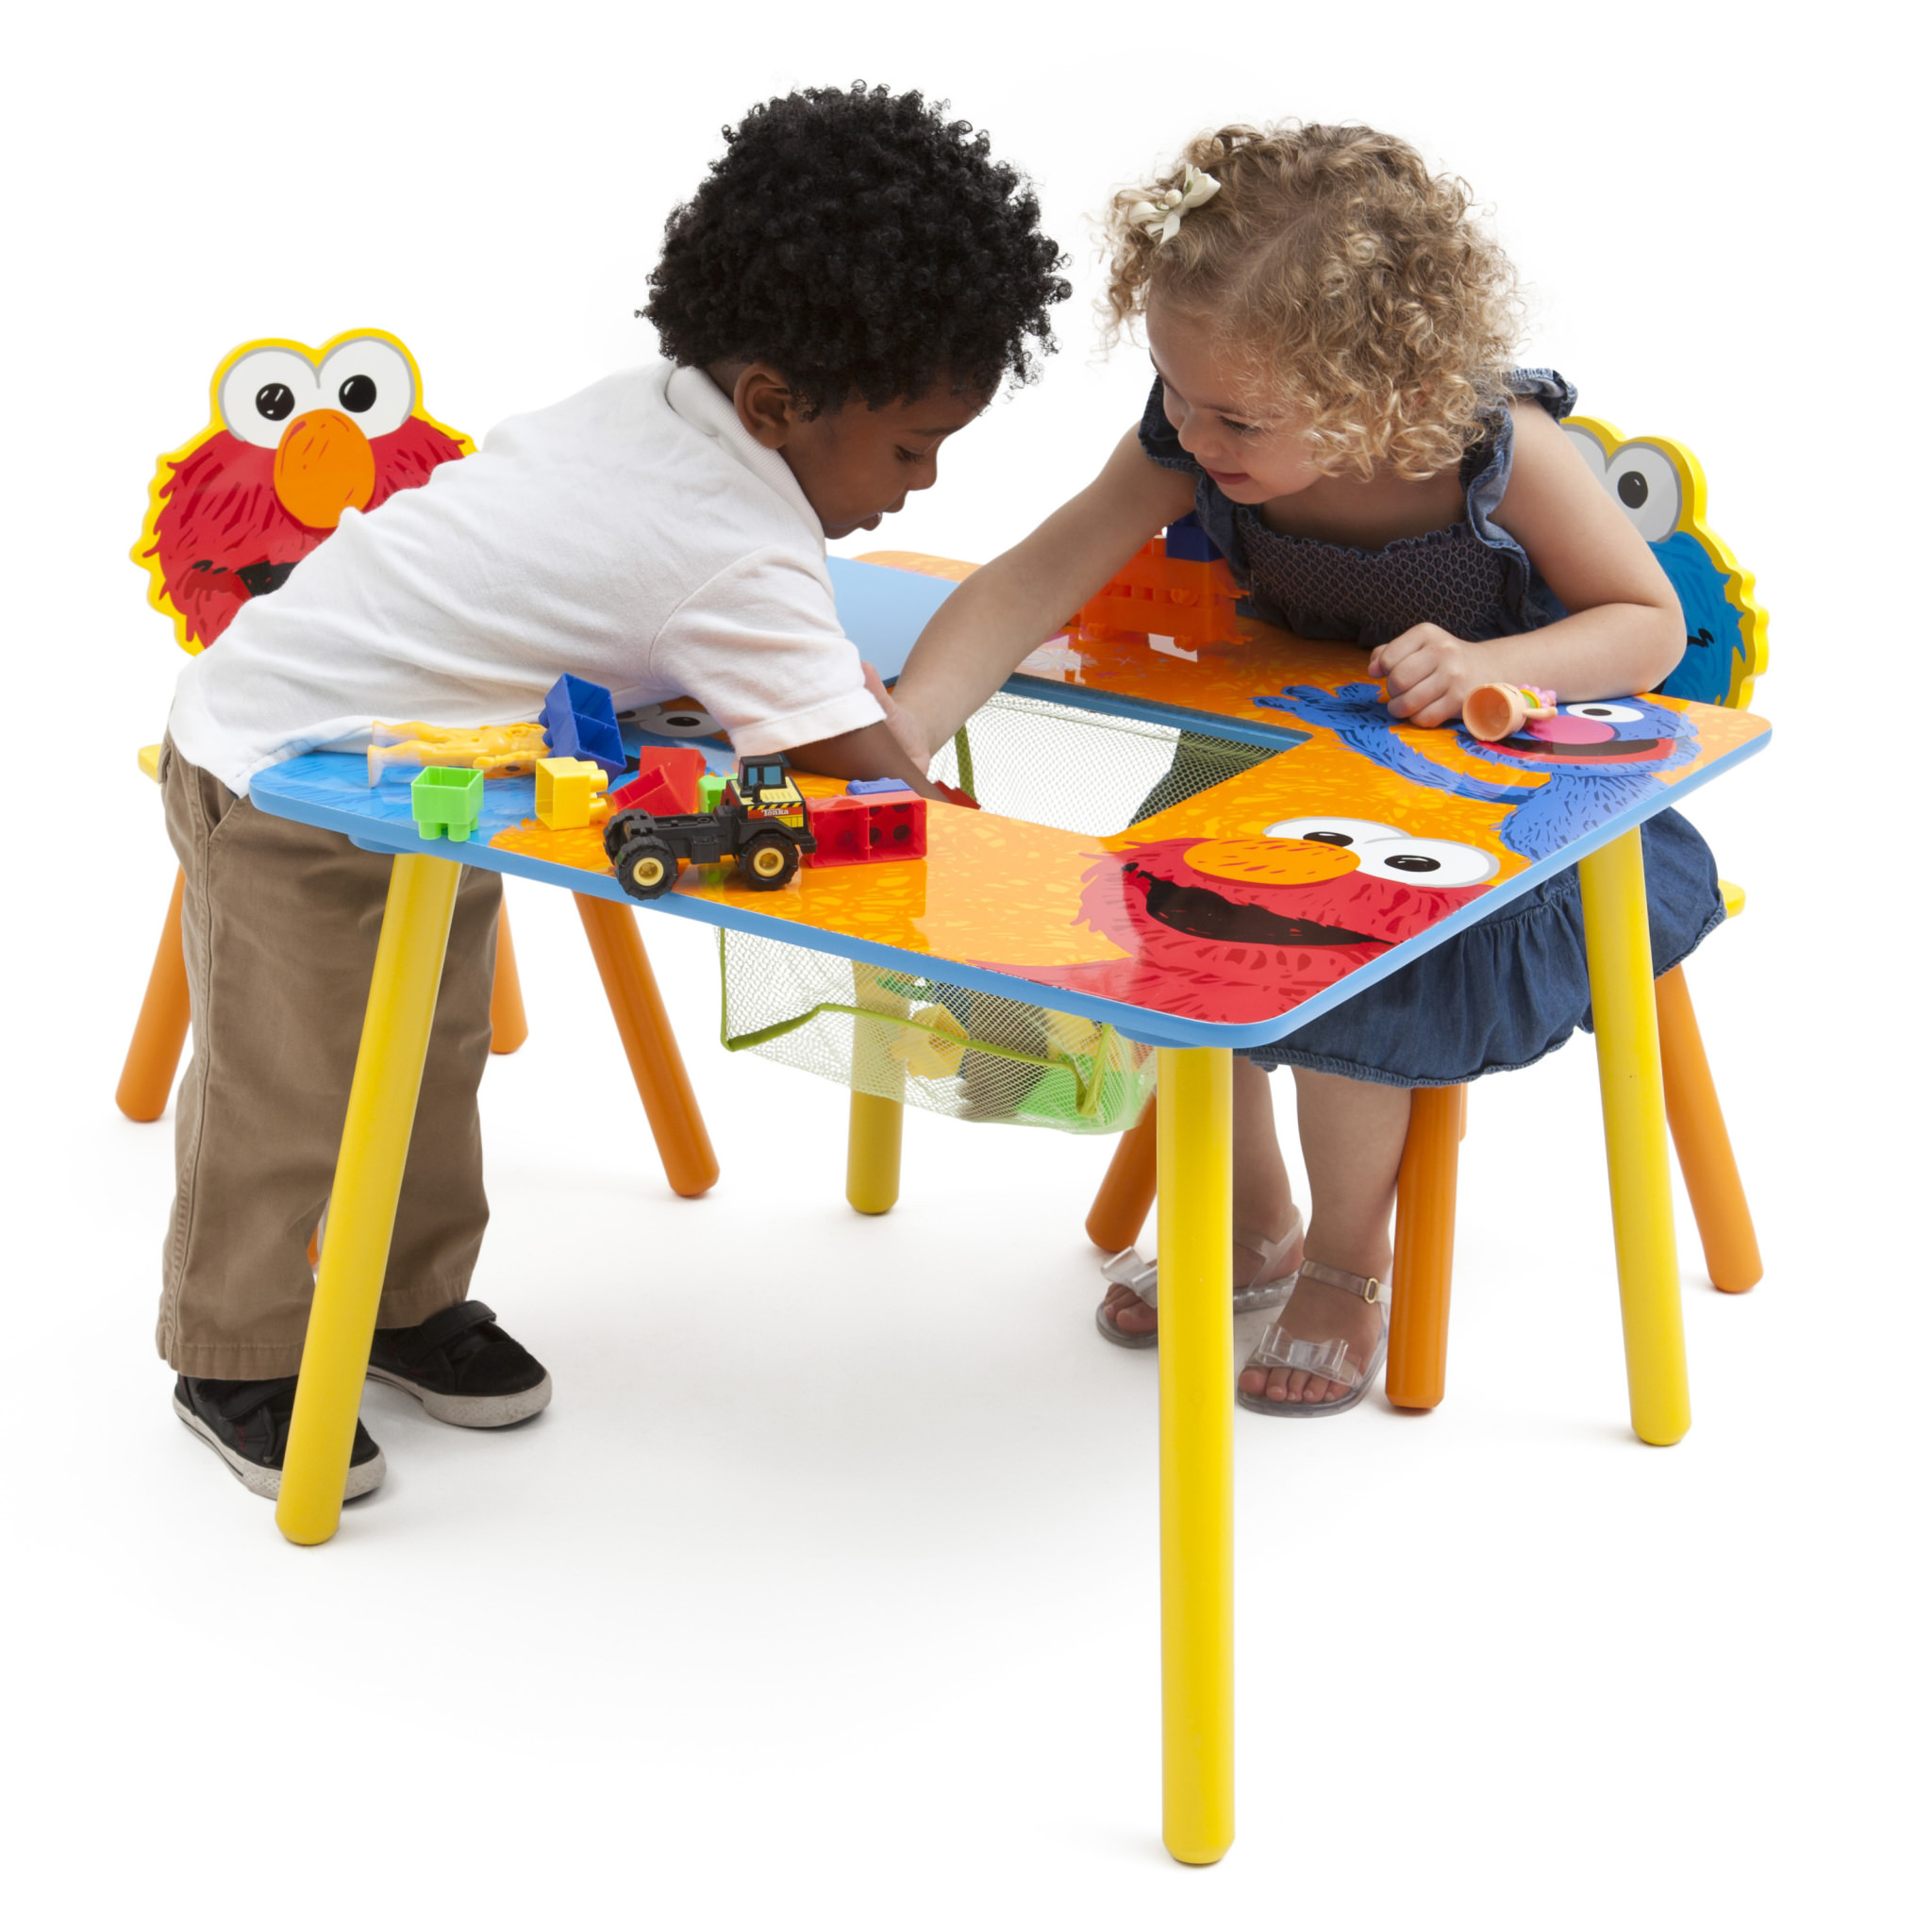 Sesame Street Wood Kids Storage Table and Chairs Set by Delta Children, Greenguard Gold Certified - image 3 of 8